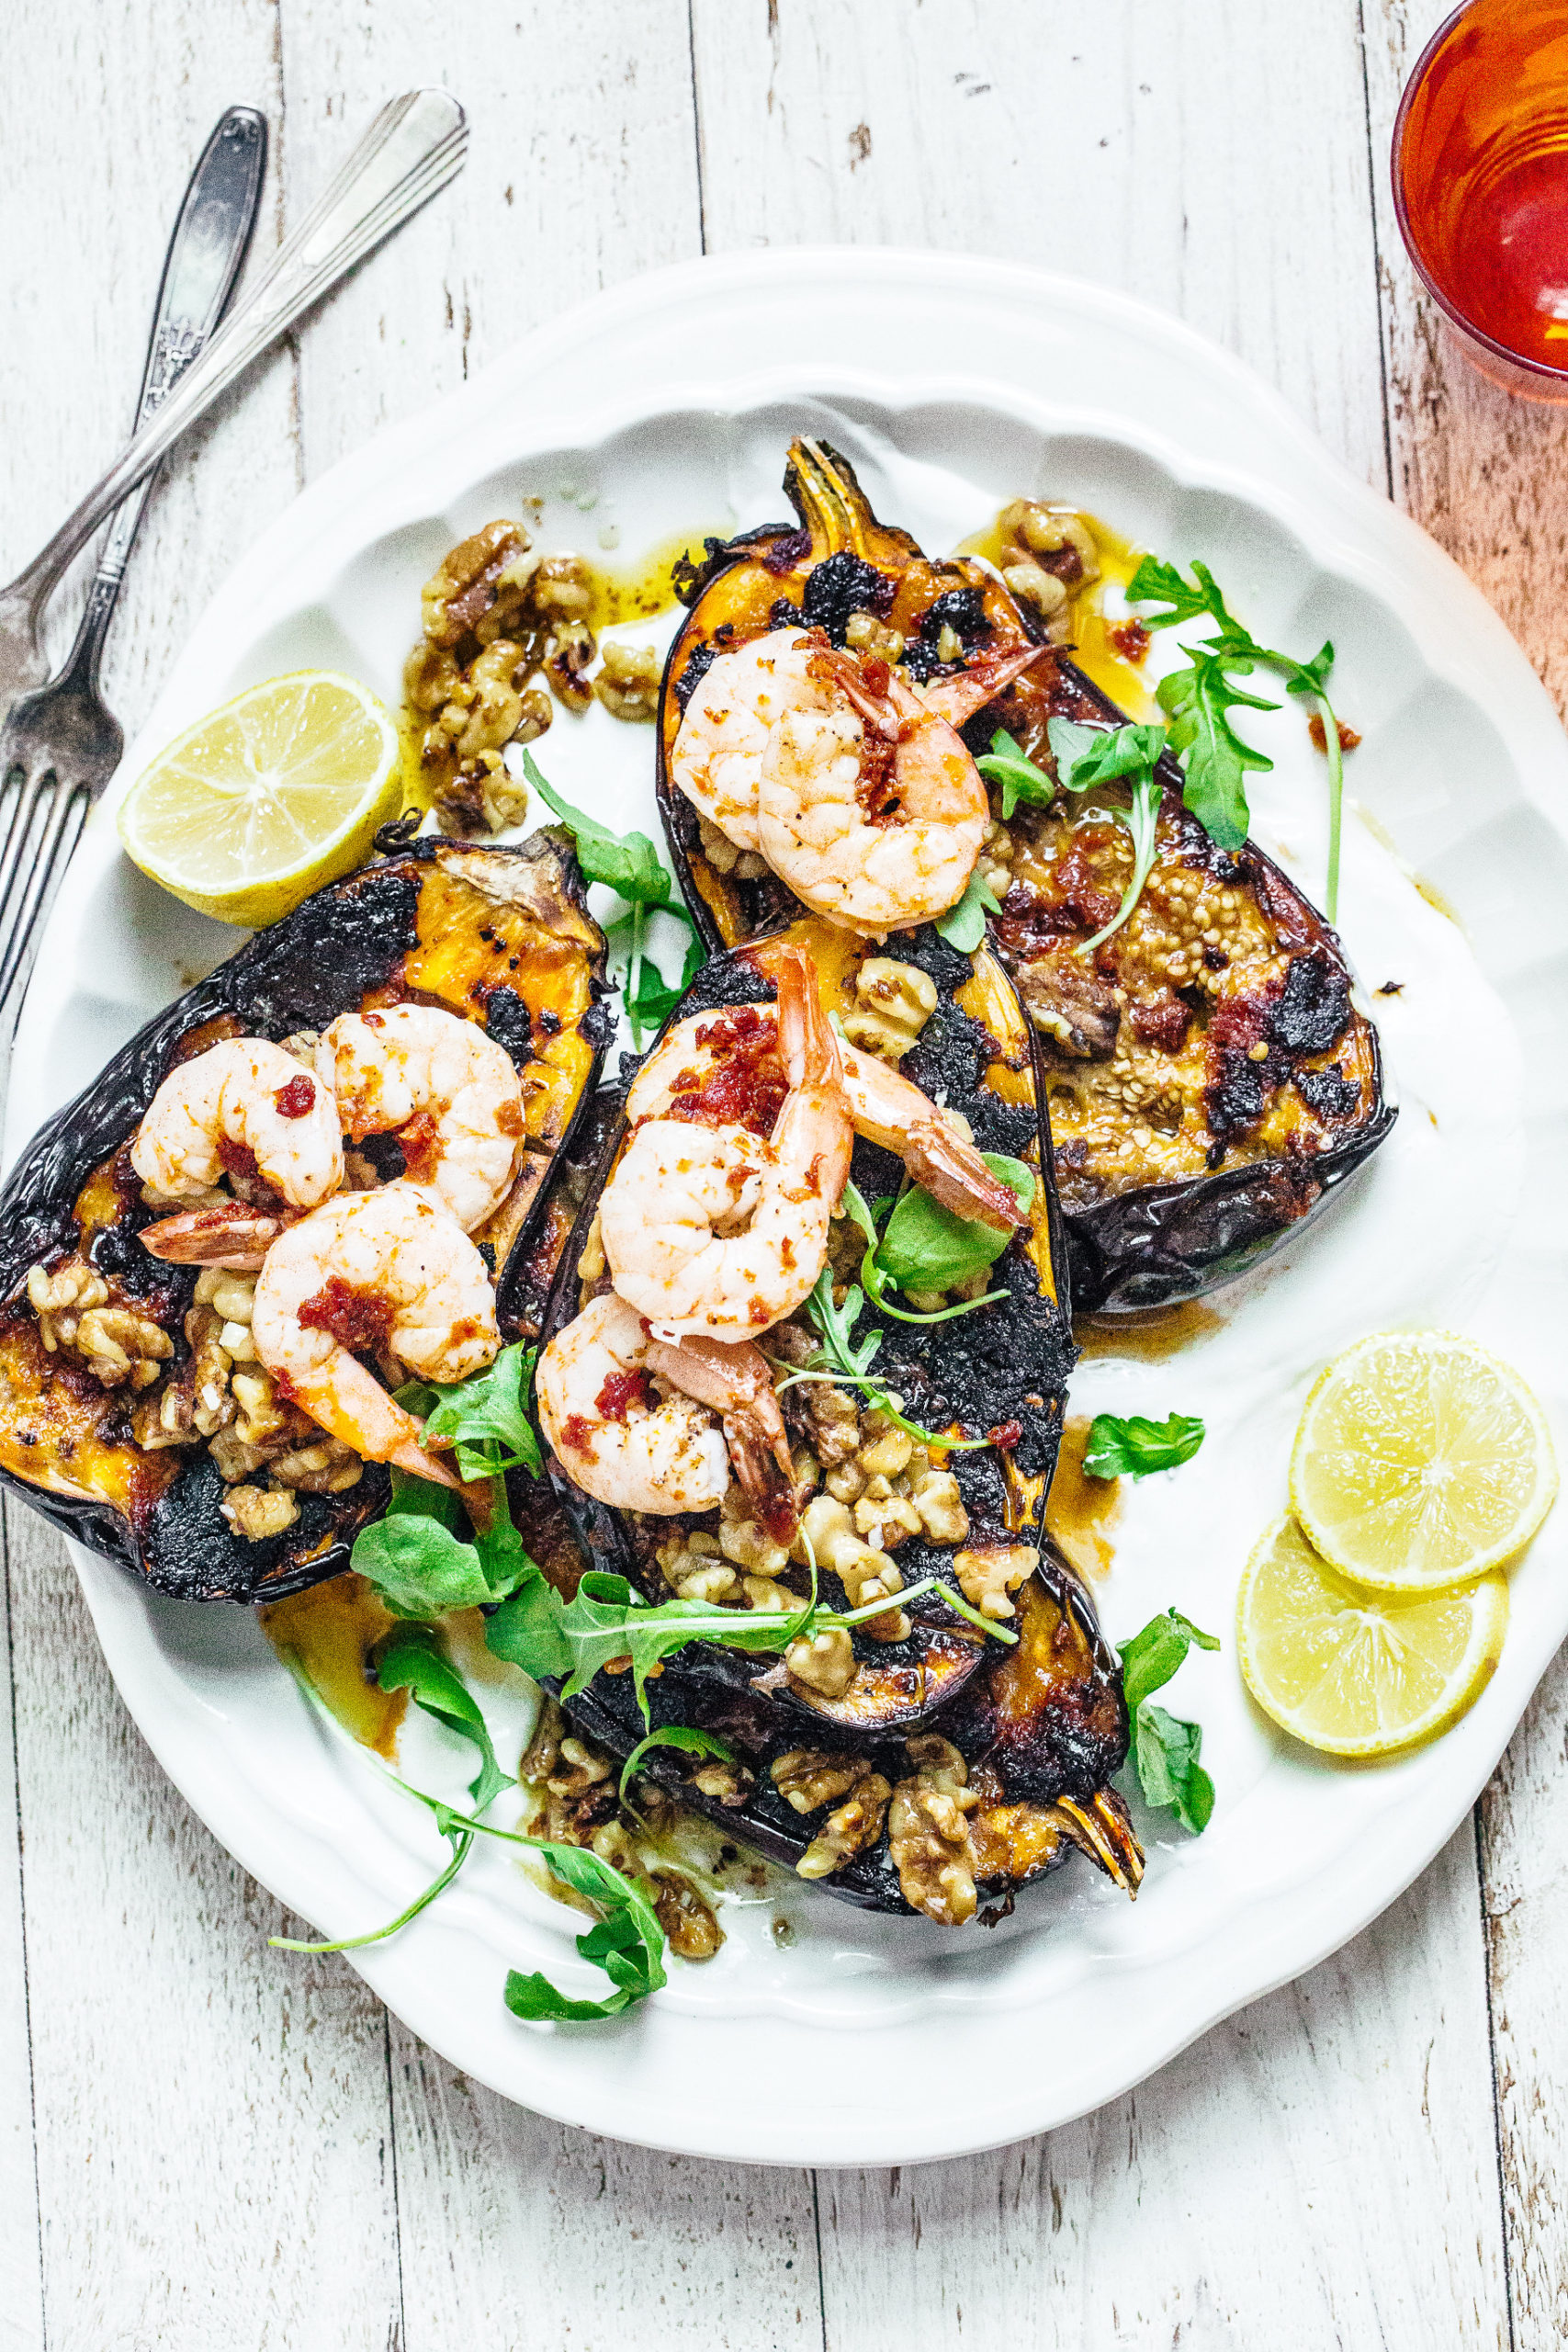 Slow Roasted Eggplant with Garlicky Walnuts and Shrimp